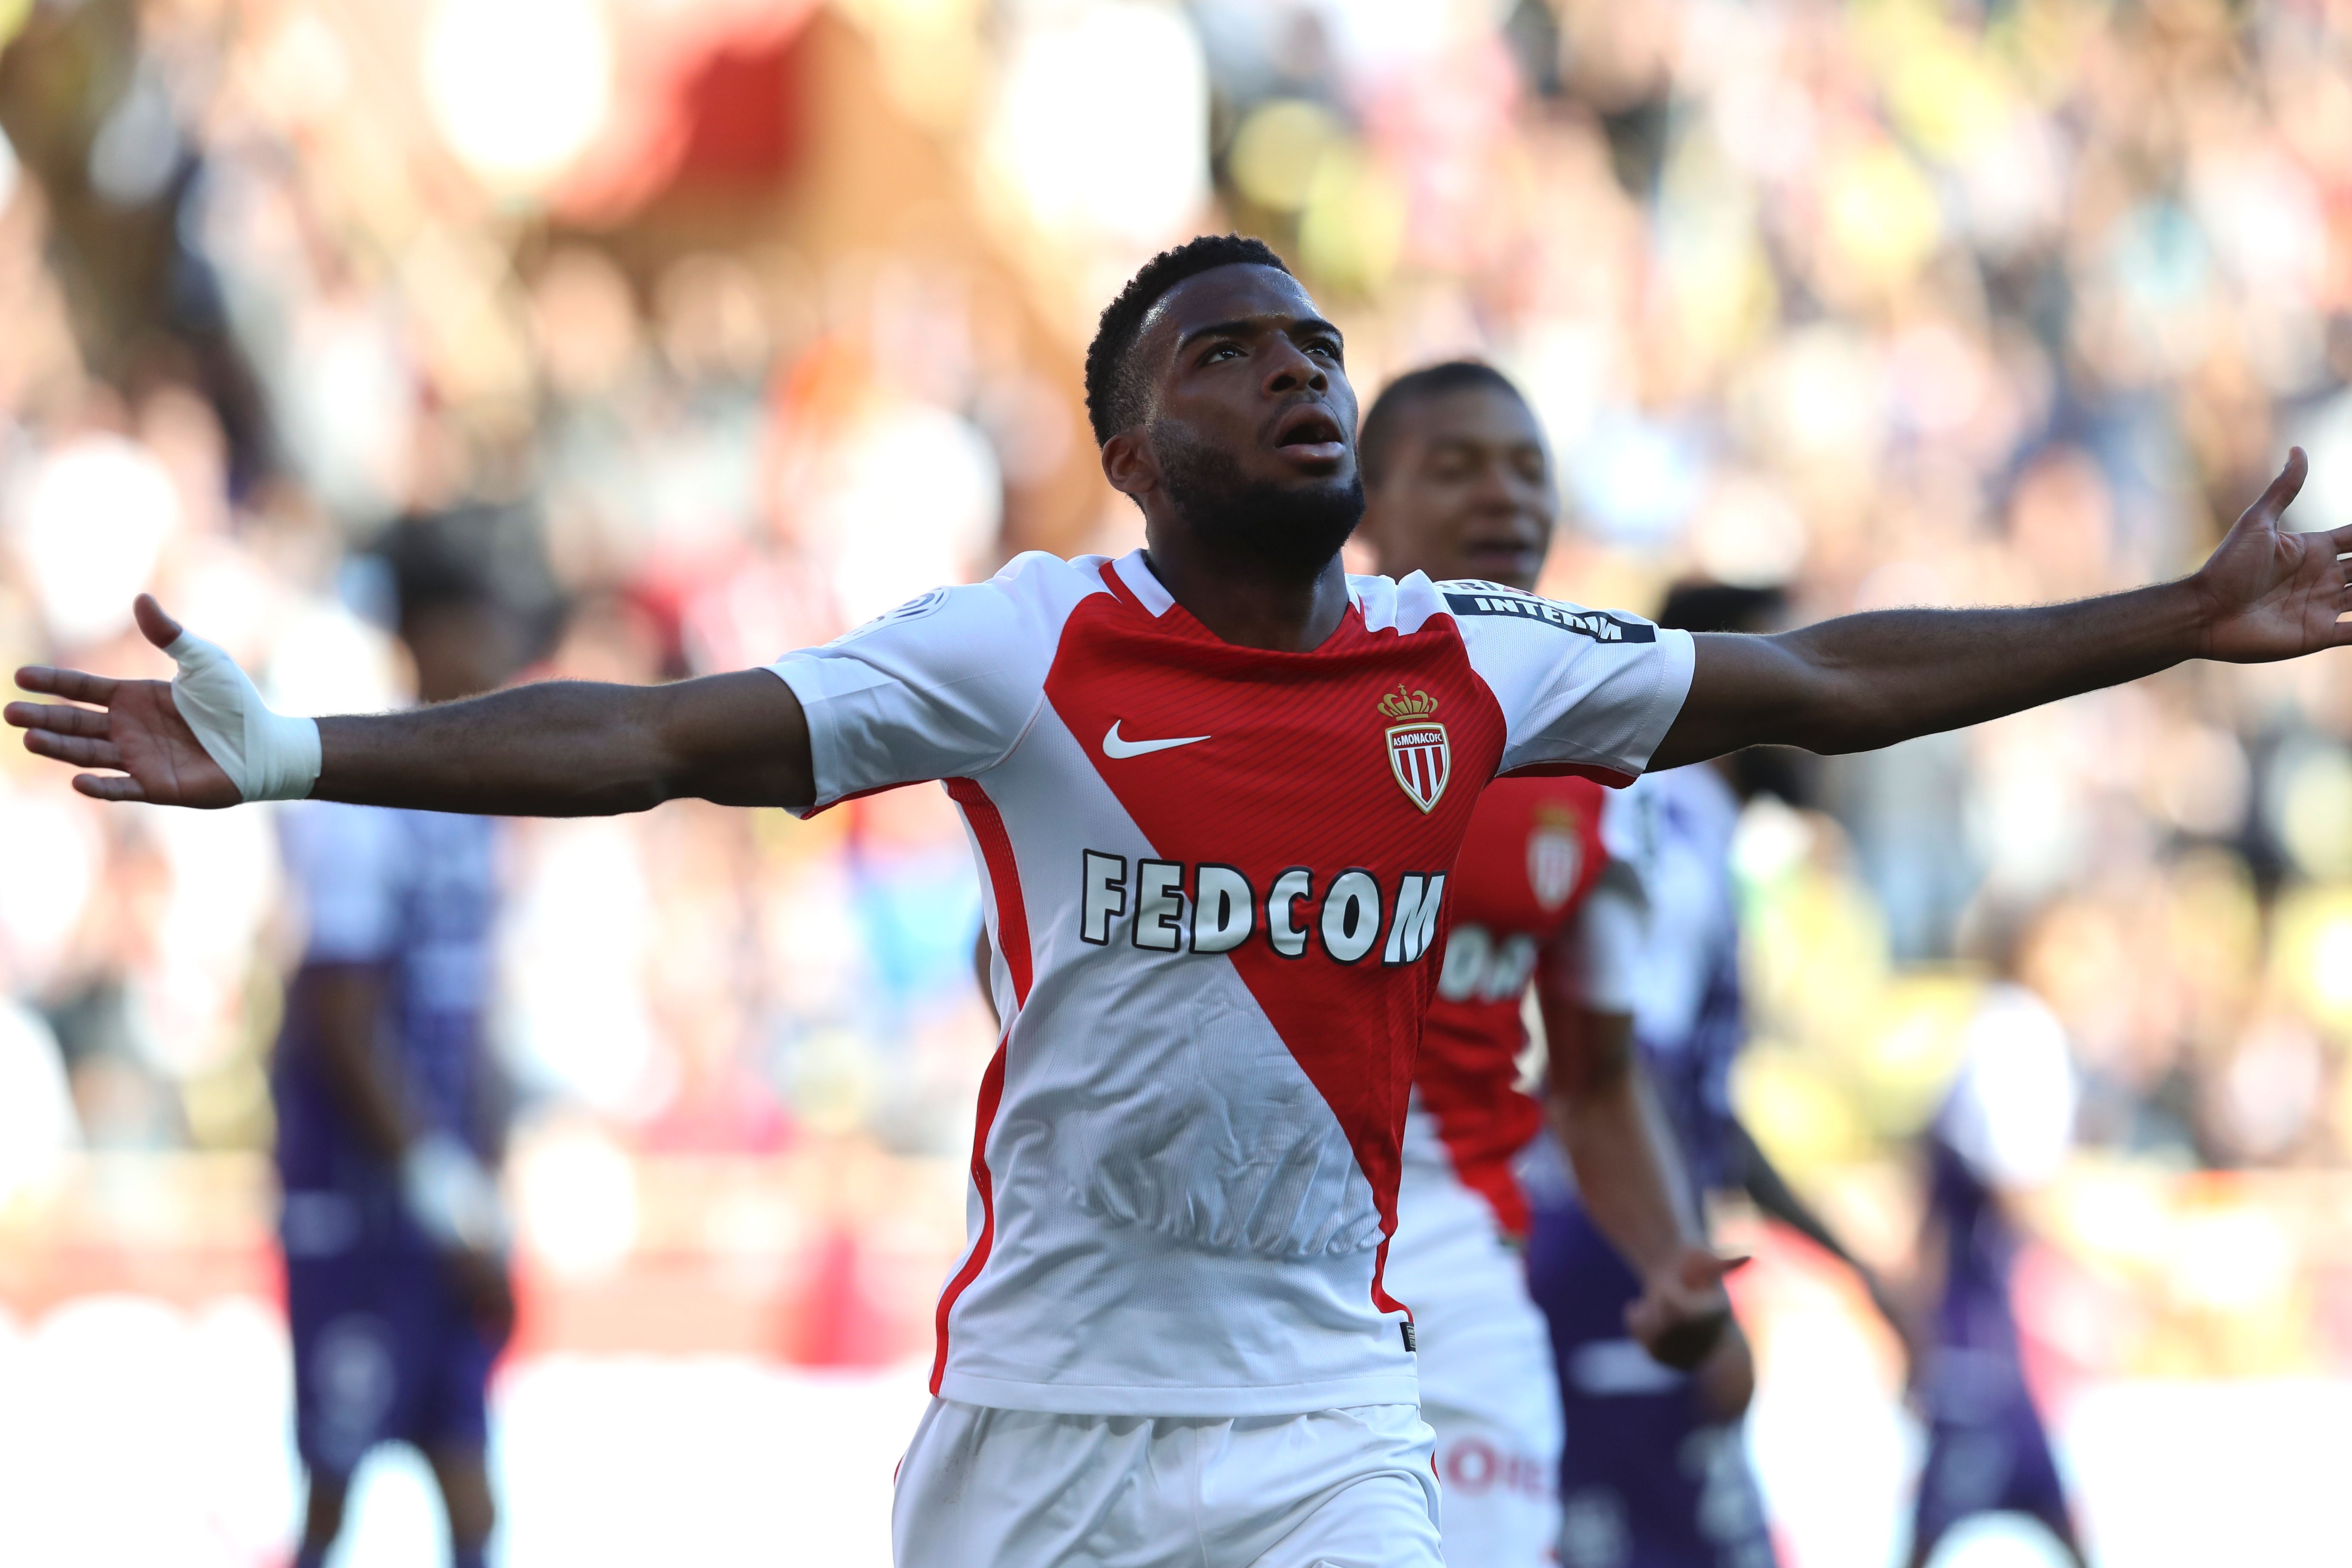 Monaco's French midfielder Thomas Lemar celebrates after scoring a goal during the French L1 football match Monaco (ASM) vs Toulouse (TFC) on April 29, 2017 at the "Louis II Stadium" in Monaco. / AFP PHOTO / VALERY HACHE        (Photo credit should read VALERY HACHE/AFP/Getty Images)